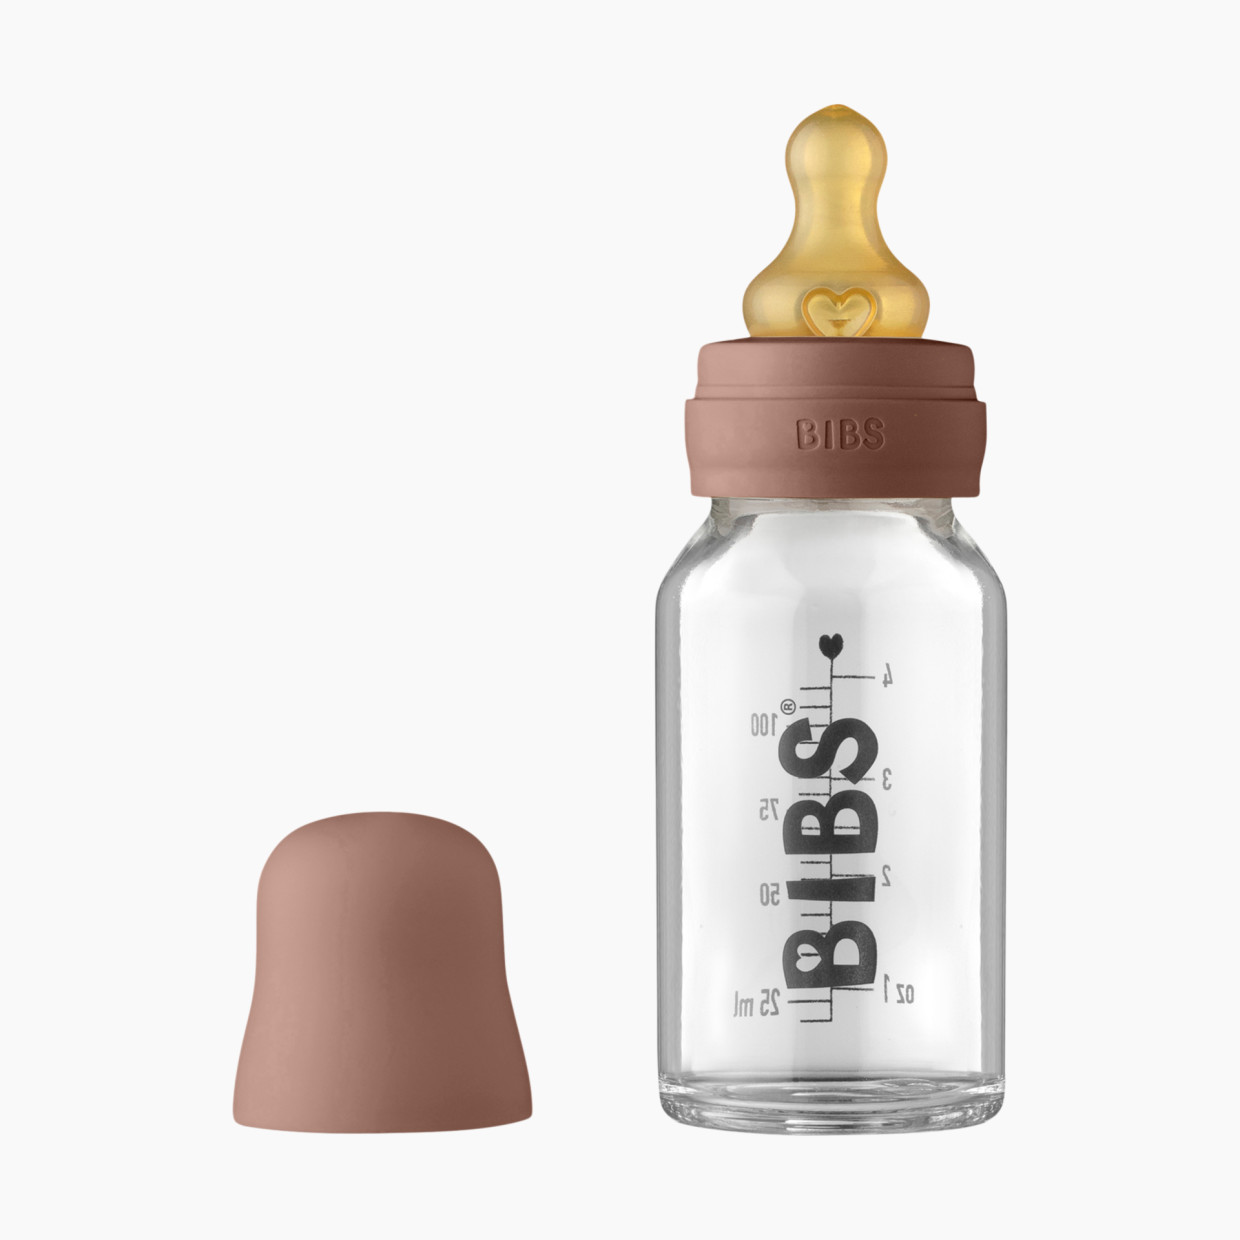 BIBS Baby Glass Bottle Complete Set with Natural Rubber Nipple - Woodchuck, 110ml.